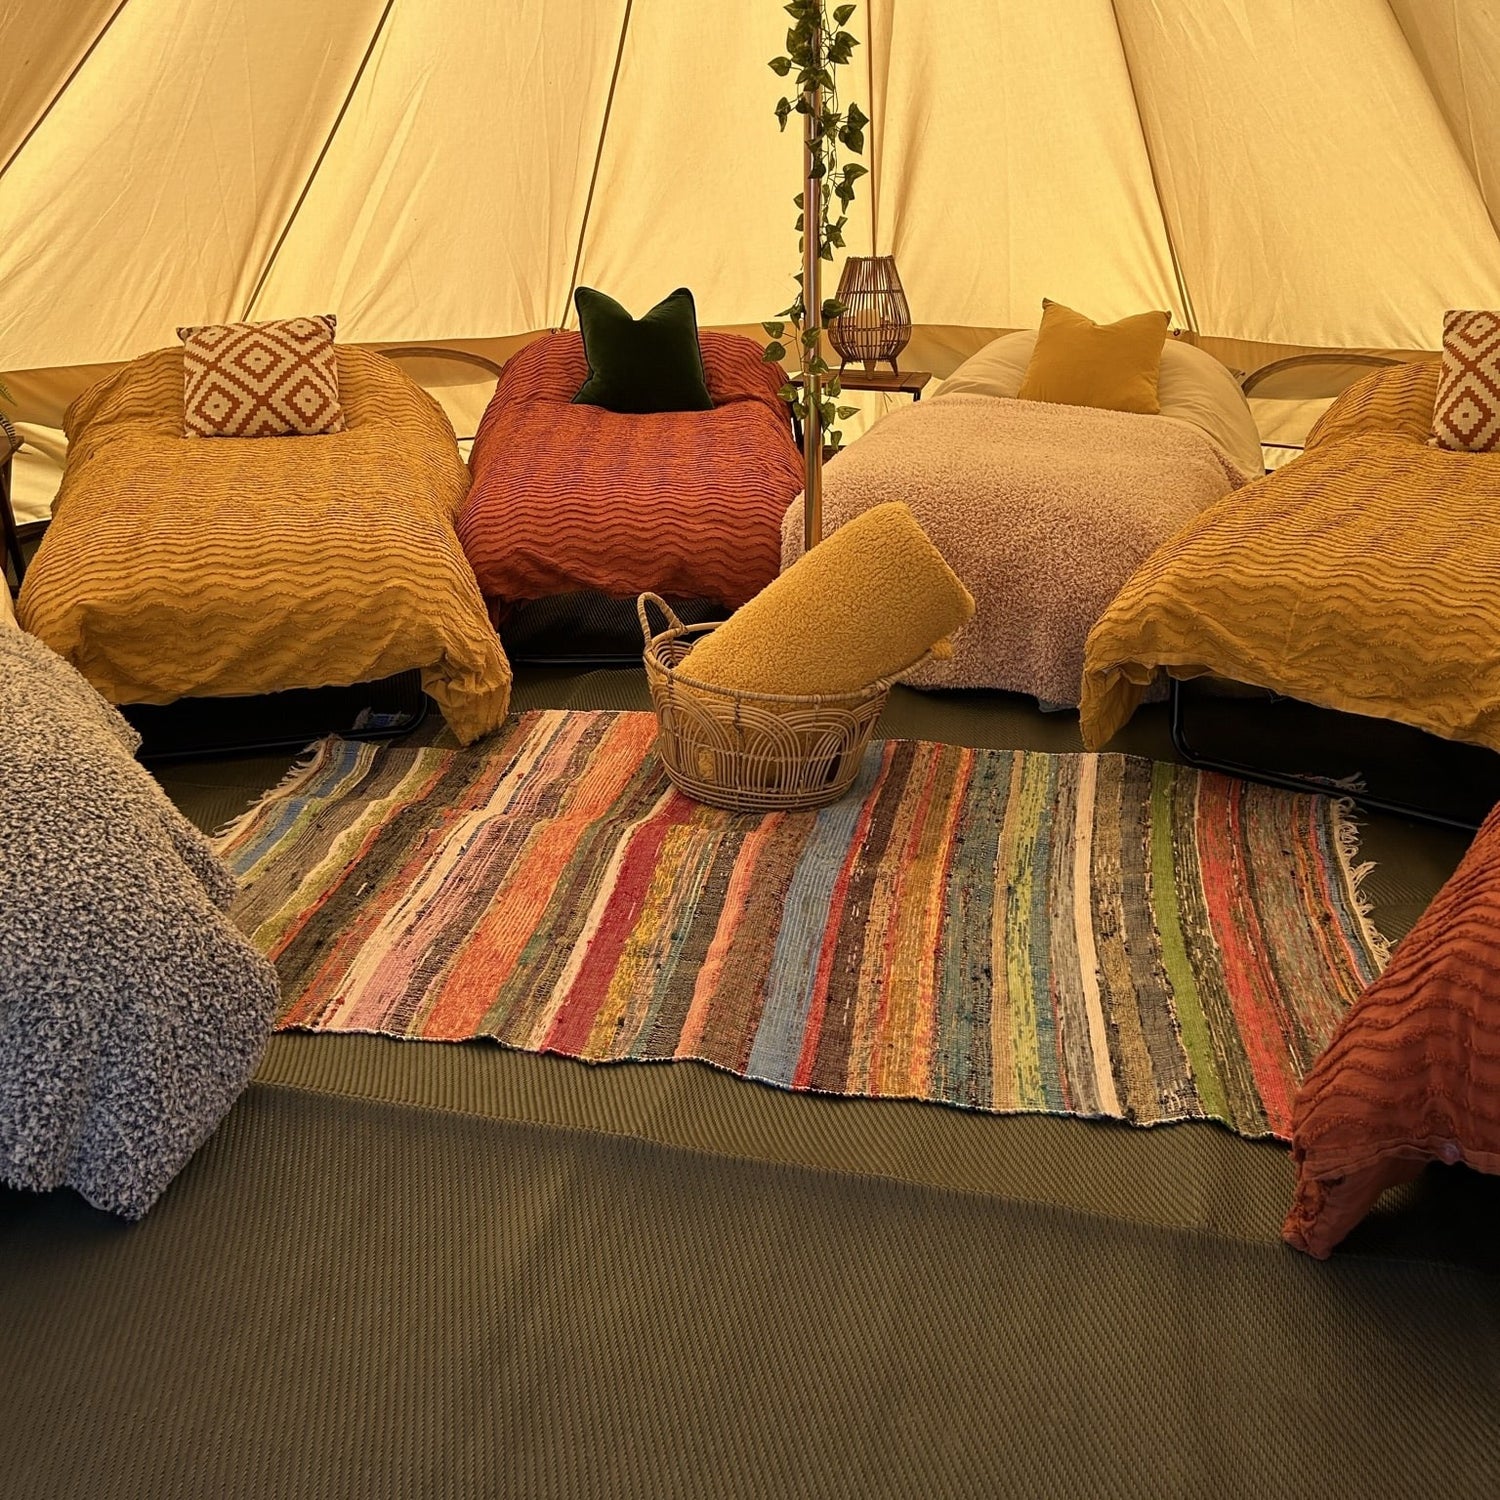 5m Bell Tent Fireproof - [Bell Tents]